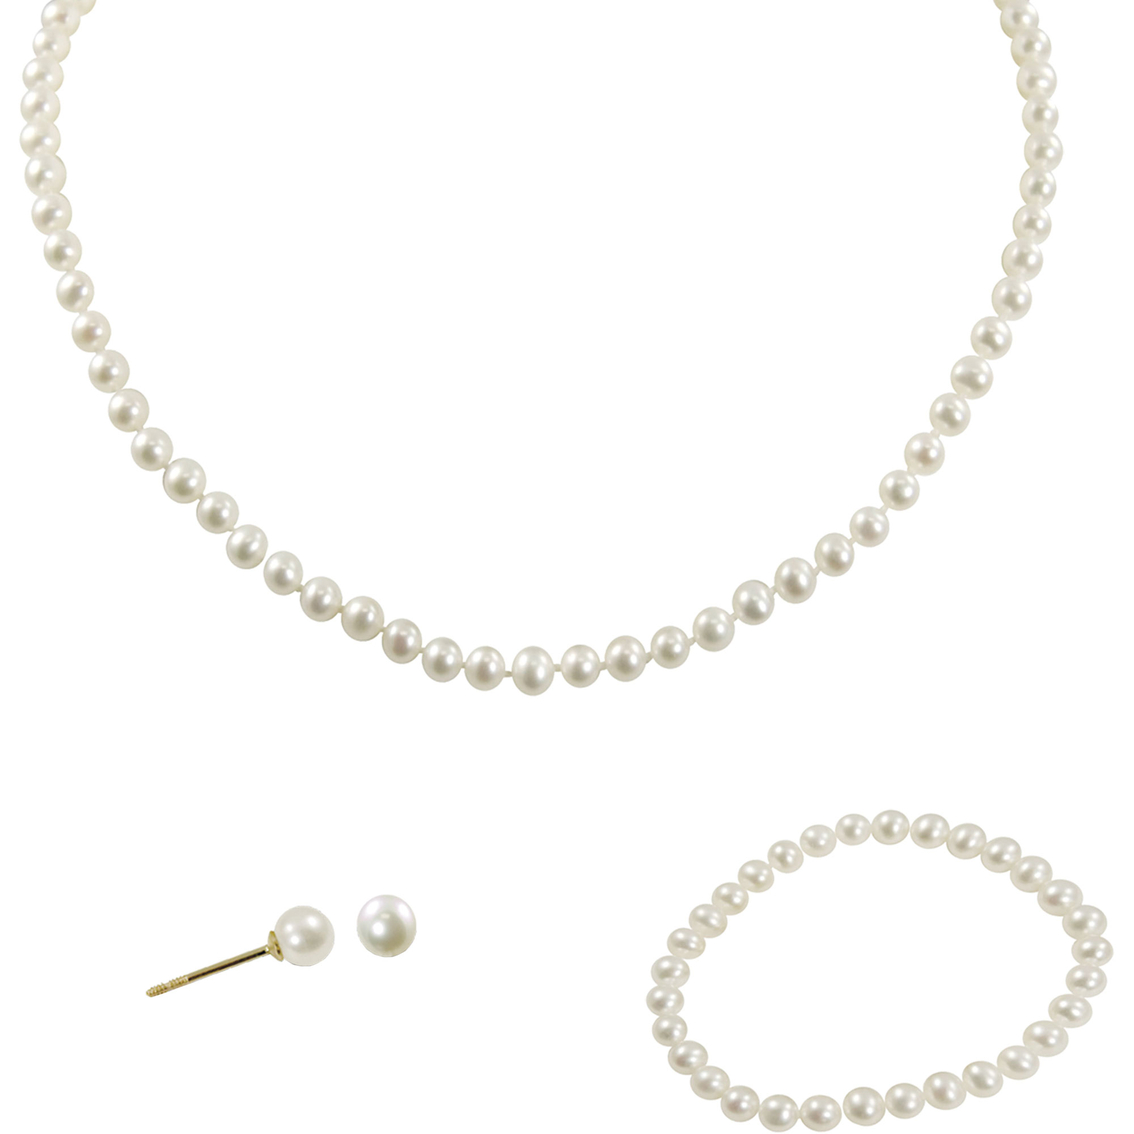 14K Yellow Gold Childs First 4-4.5mm Cultured Freshwater Pearl Gift Set - Image 2 of 2